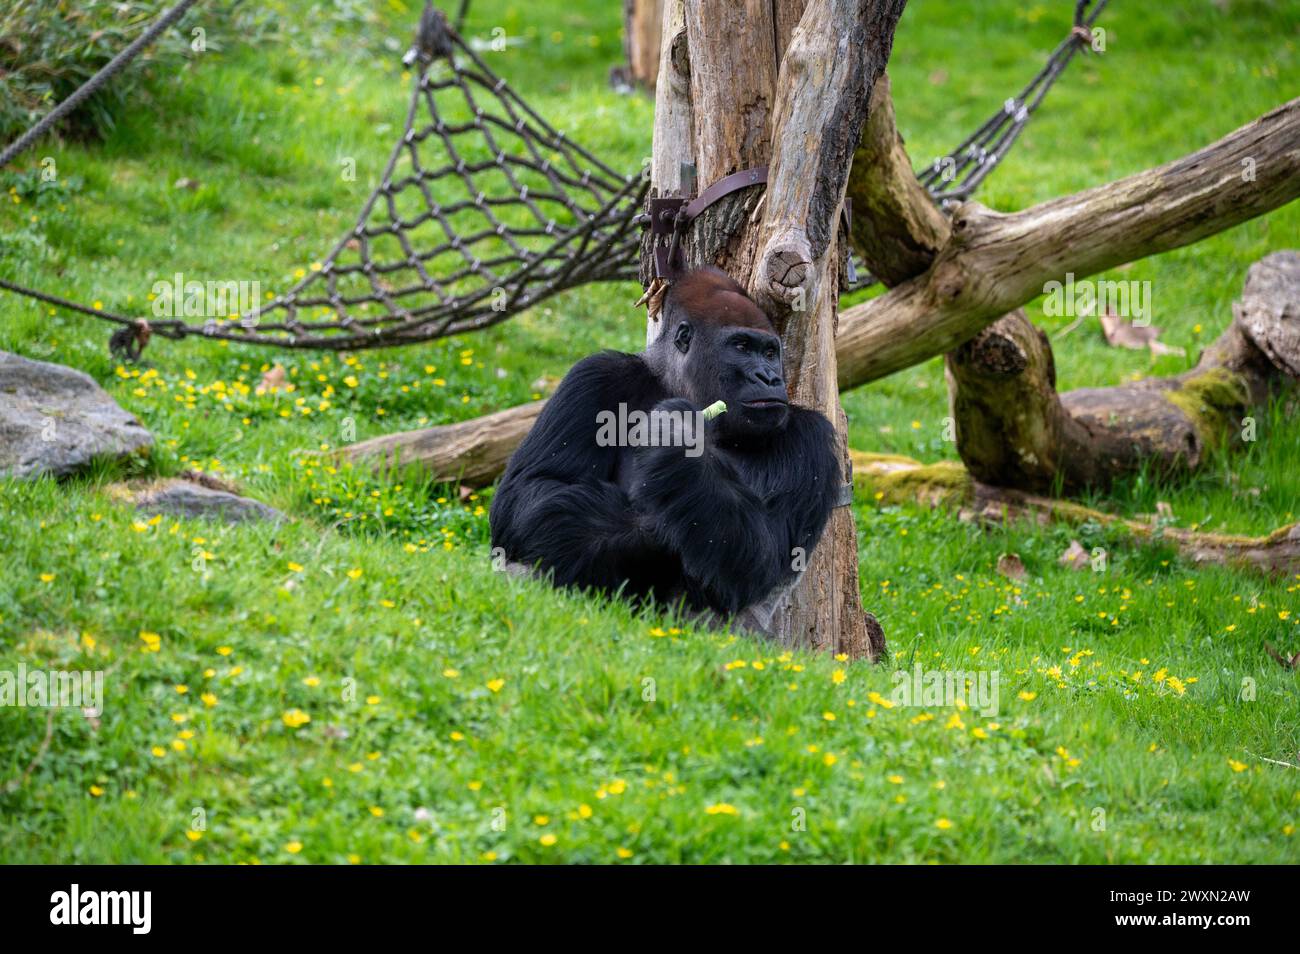 A gorilla resting near a tree while munching on leaves Stock Photo